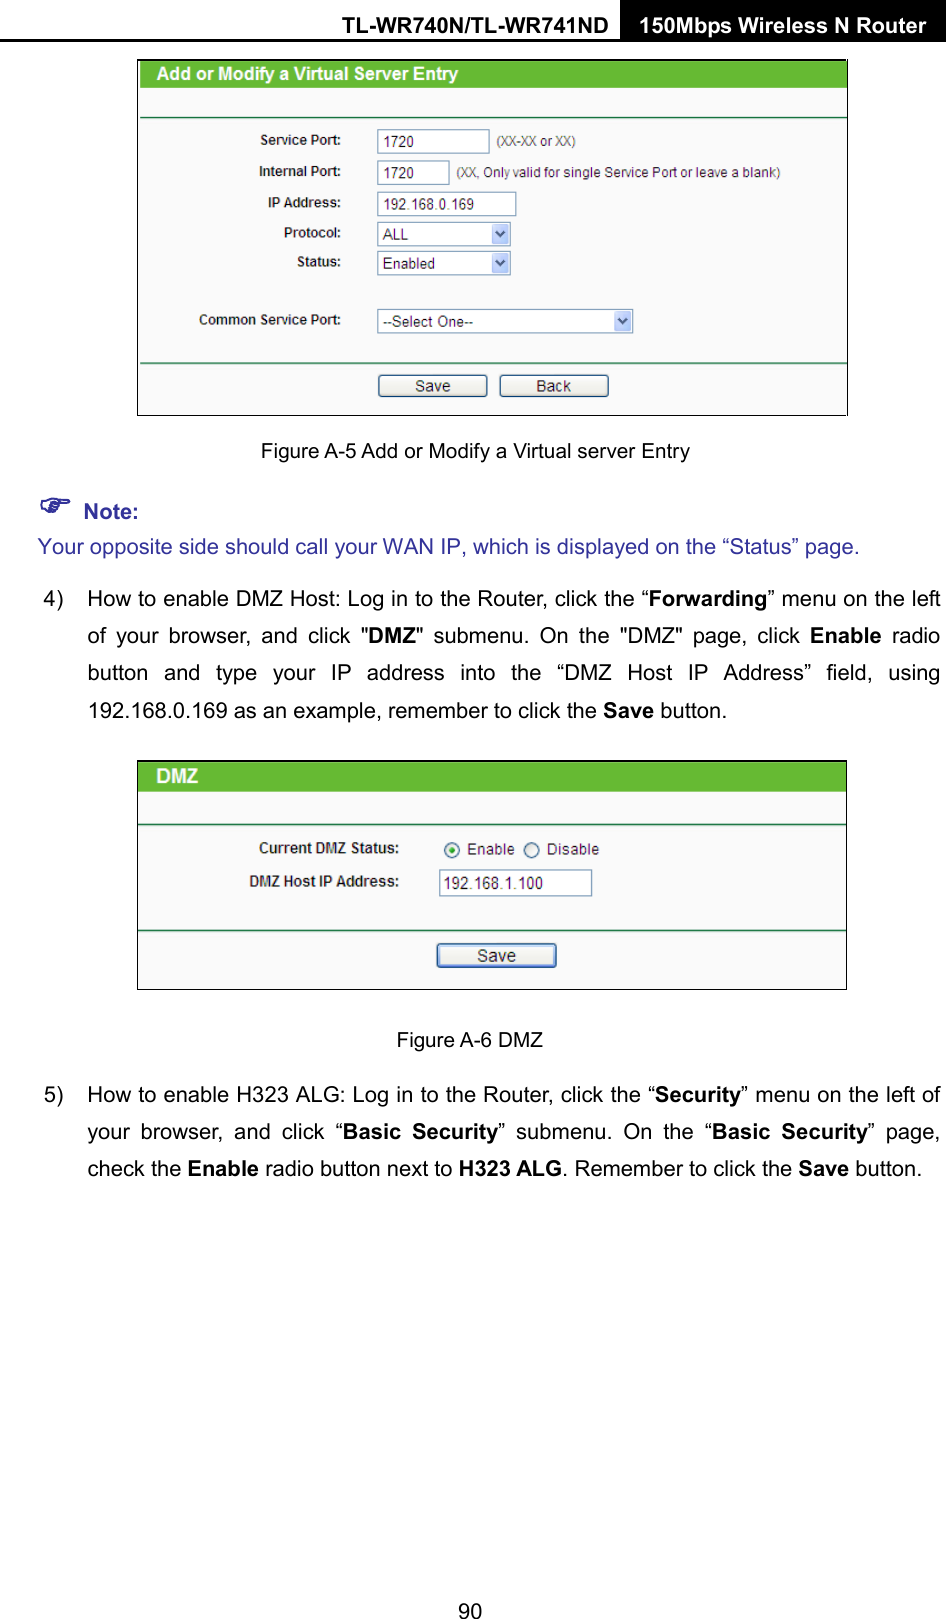 TL-WR740N/TL-WR741ND 150Mbps Wireless N Router    Figure A-5 Add or Modify a Virtual server Entry  Note: Your opposite side should call your WAN IP, which is displayed on the “Status” page. 4) How to enable DMZ Host: Log in to the Router, click the “Forwarding” menu on the left of your browser, and click &quot;DMZ&quot; submenu. On the &quot;DMZ&quot; page, click Enable radio button and type your IP address into the “DMZ Host IP Address” field, using 192.168.0.169 as an example, remember to click the Save button.    Figure A-6 DMZ 5) How to enable H323 ALG: Log in to the Router, click the “Security” menu on the left of your browser, and click “Basic Security”  submenu.  On the “Basic Security”  page, check the Enable radio button next to H323 ALG. Remember to click the Save button. 90 